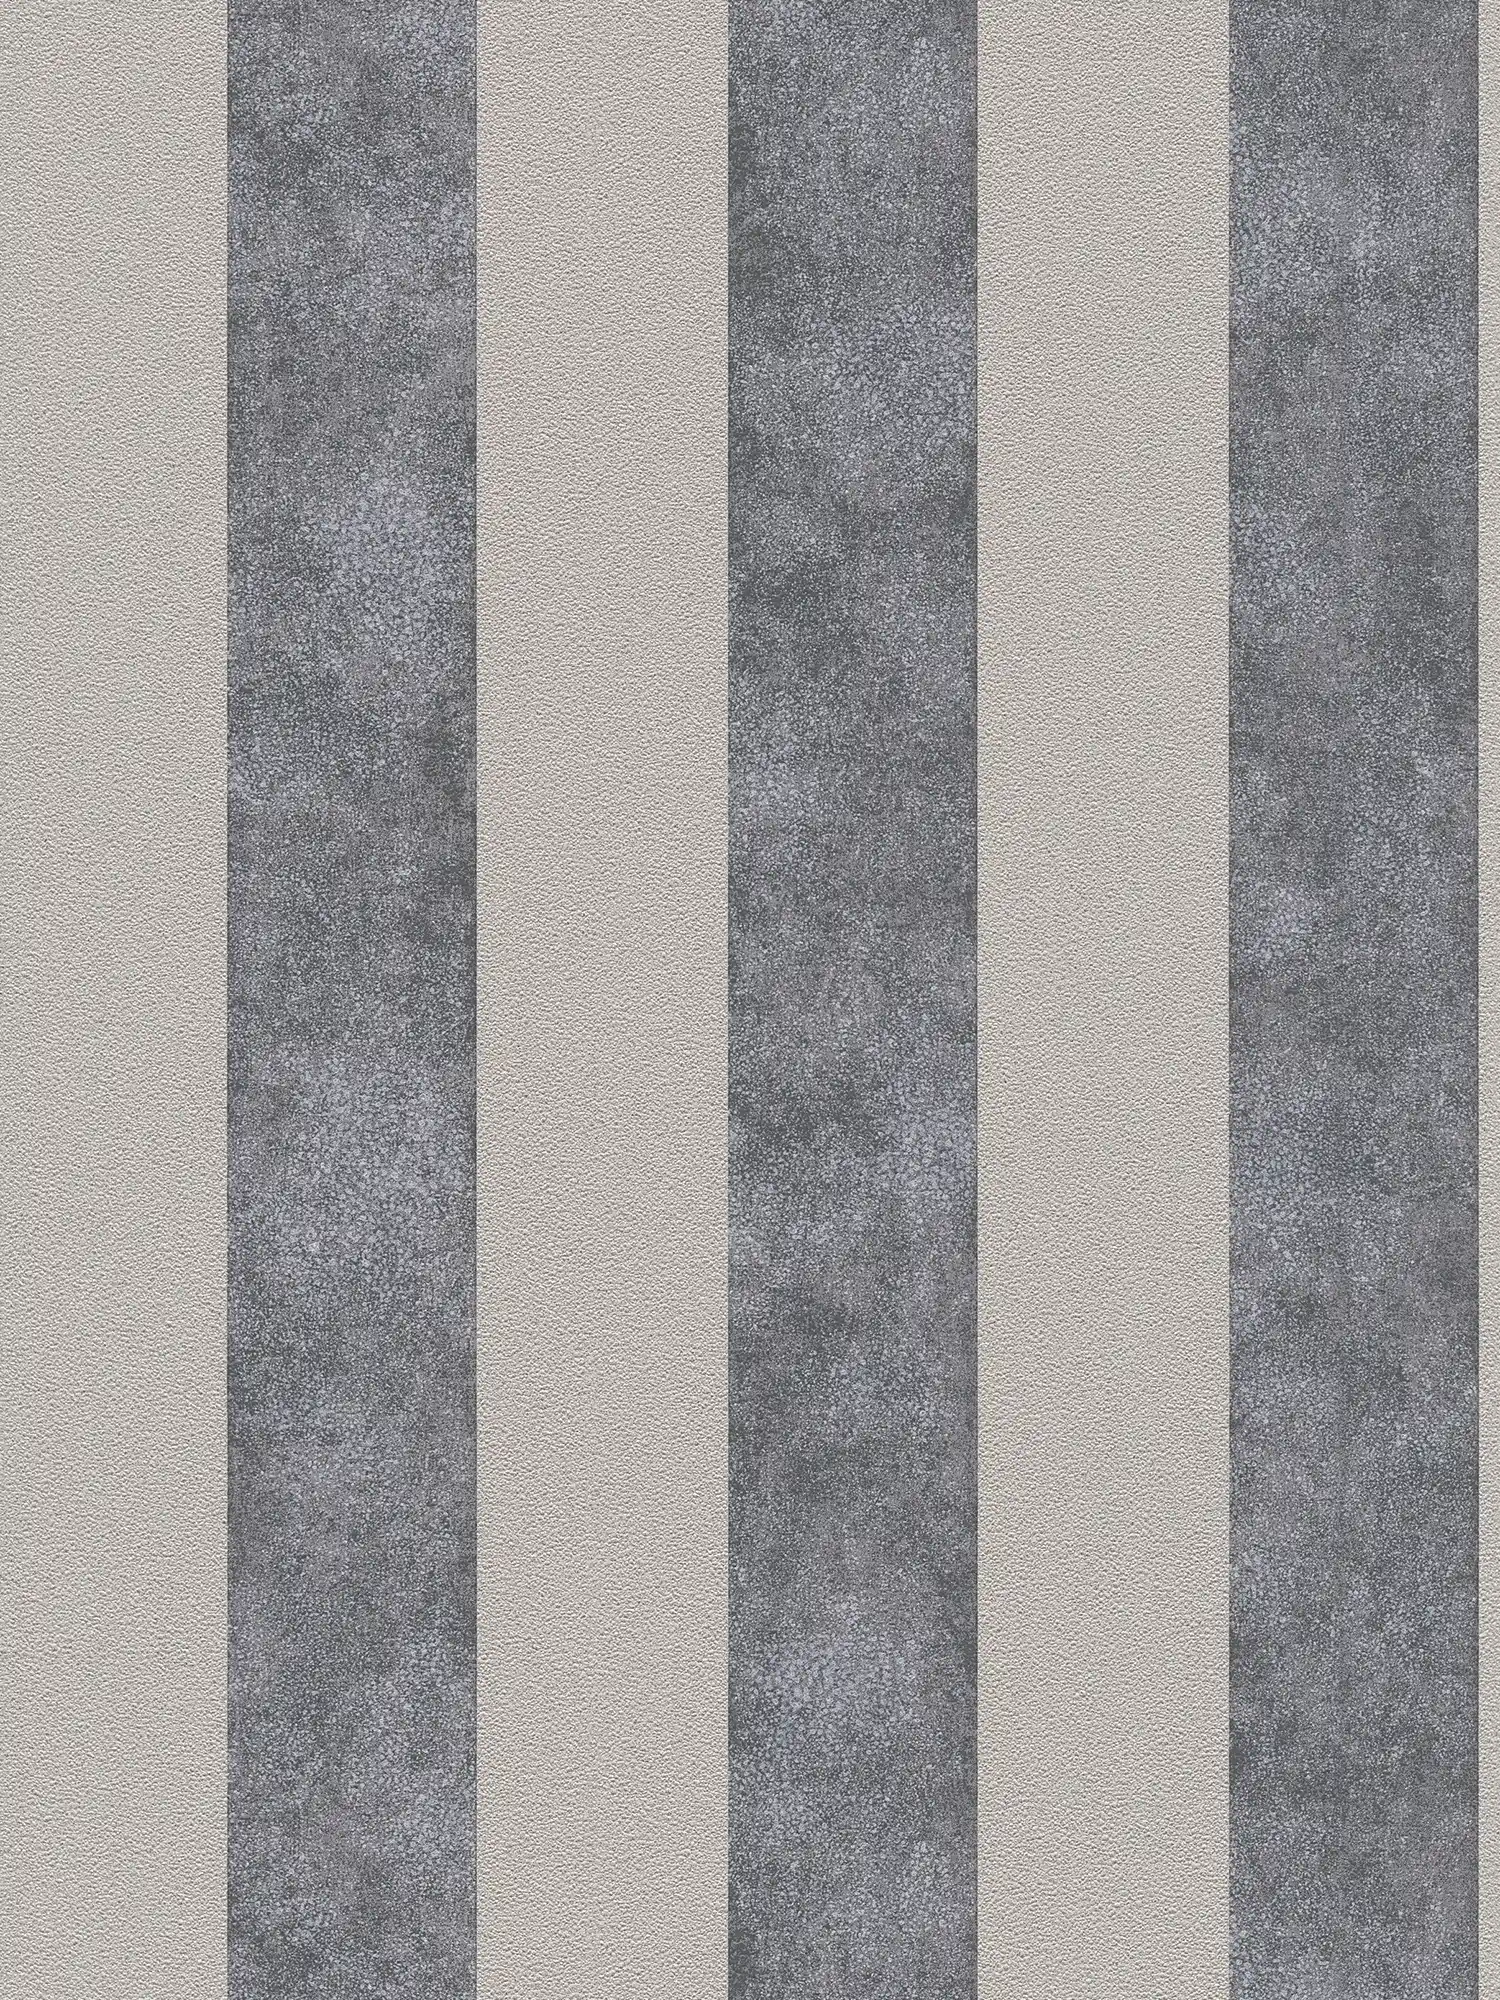 Block stripes wallpaper with colour and texture pattern - black, grey, beige
